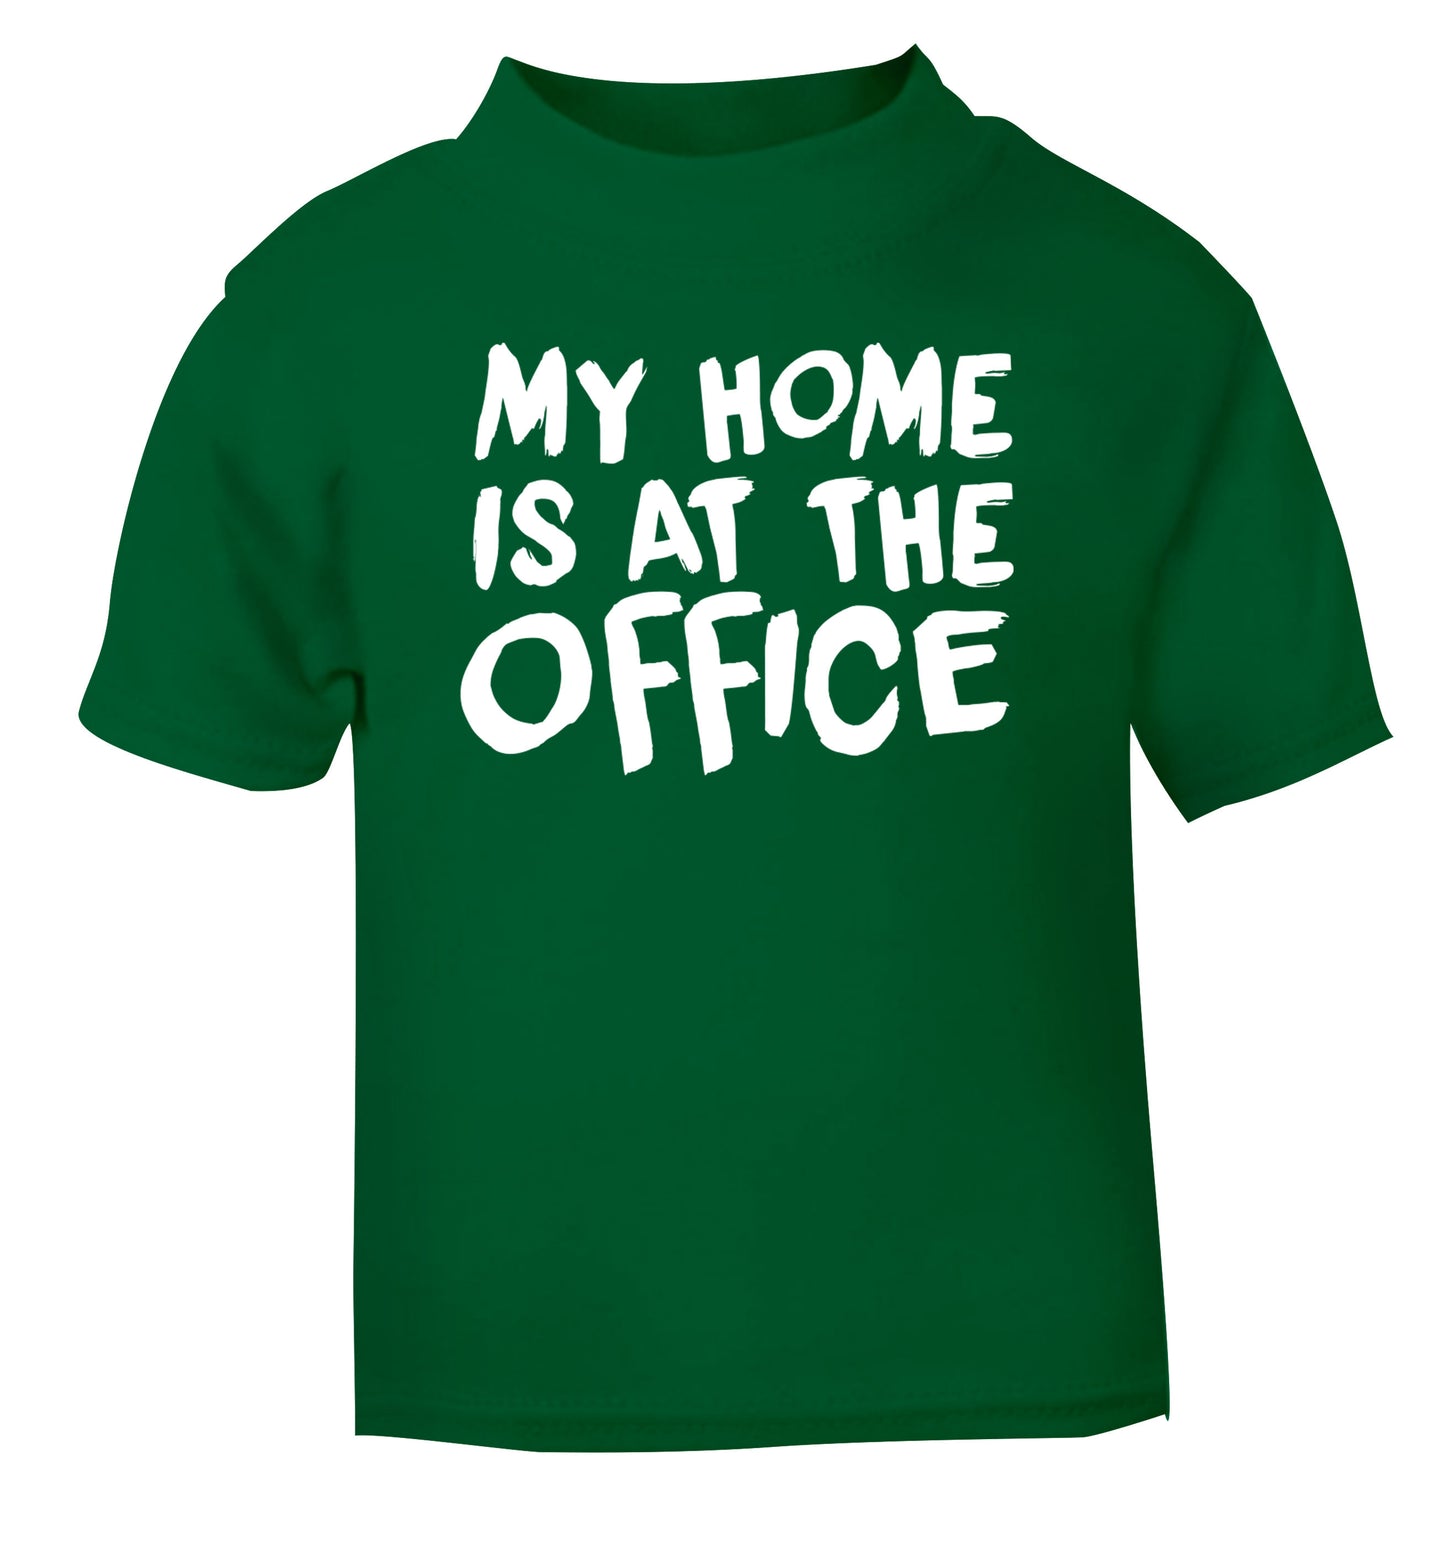 My home is at the office green Baby Toddler Tshirt 2 Years